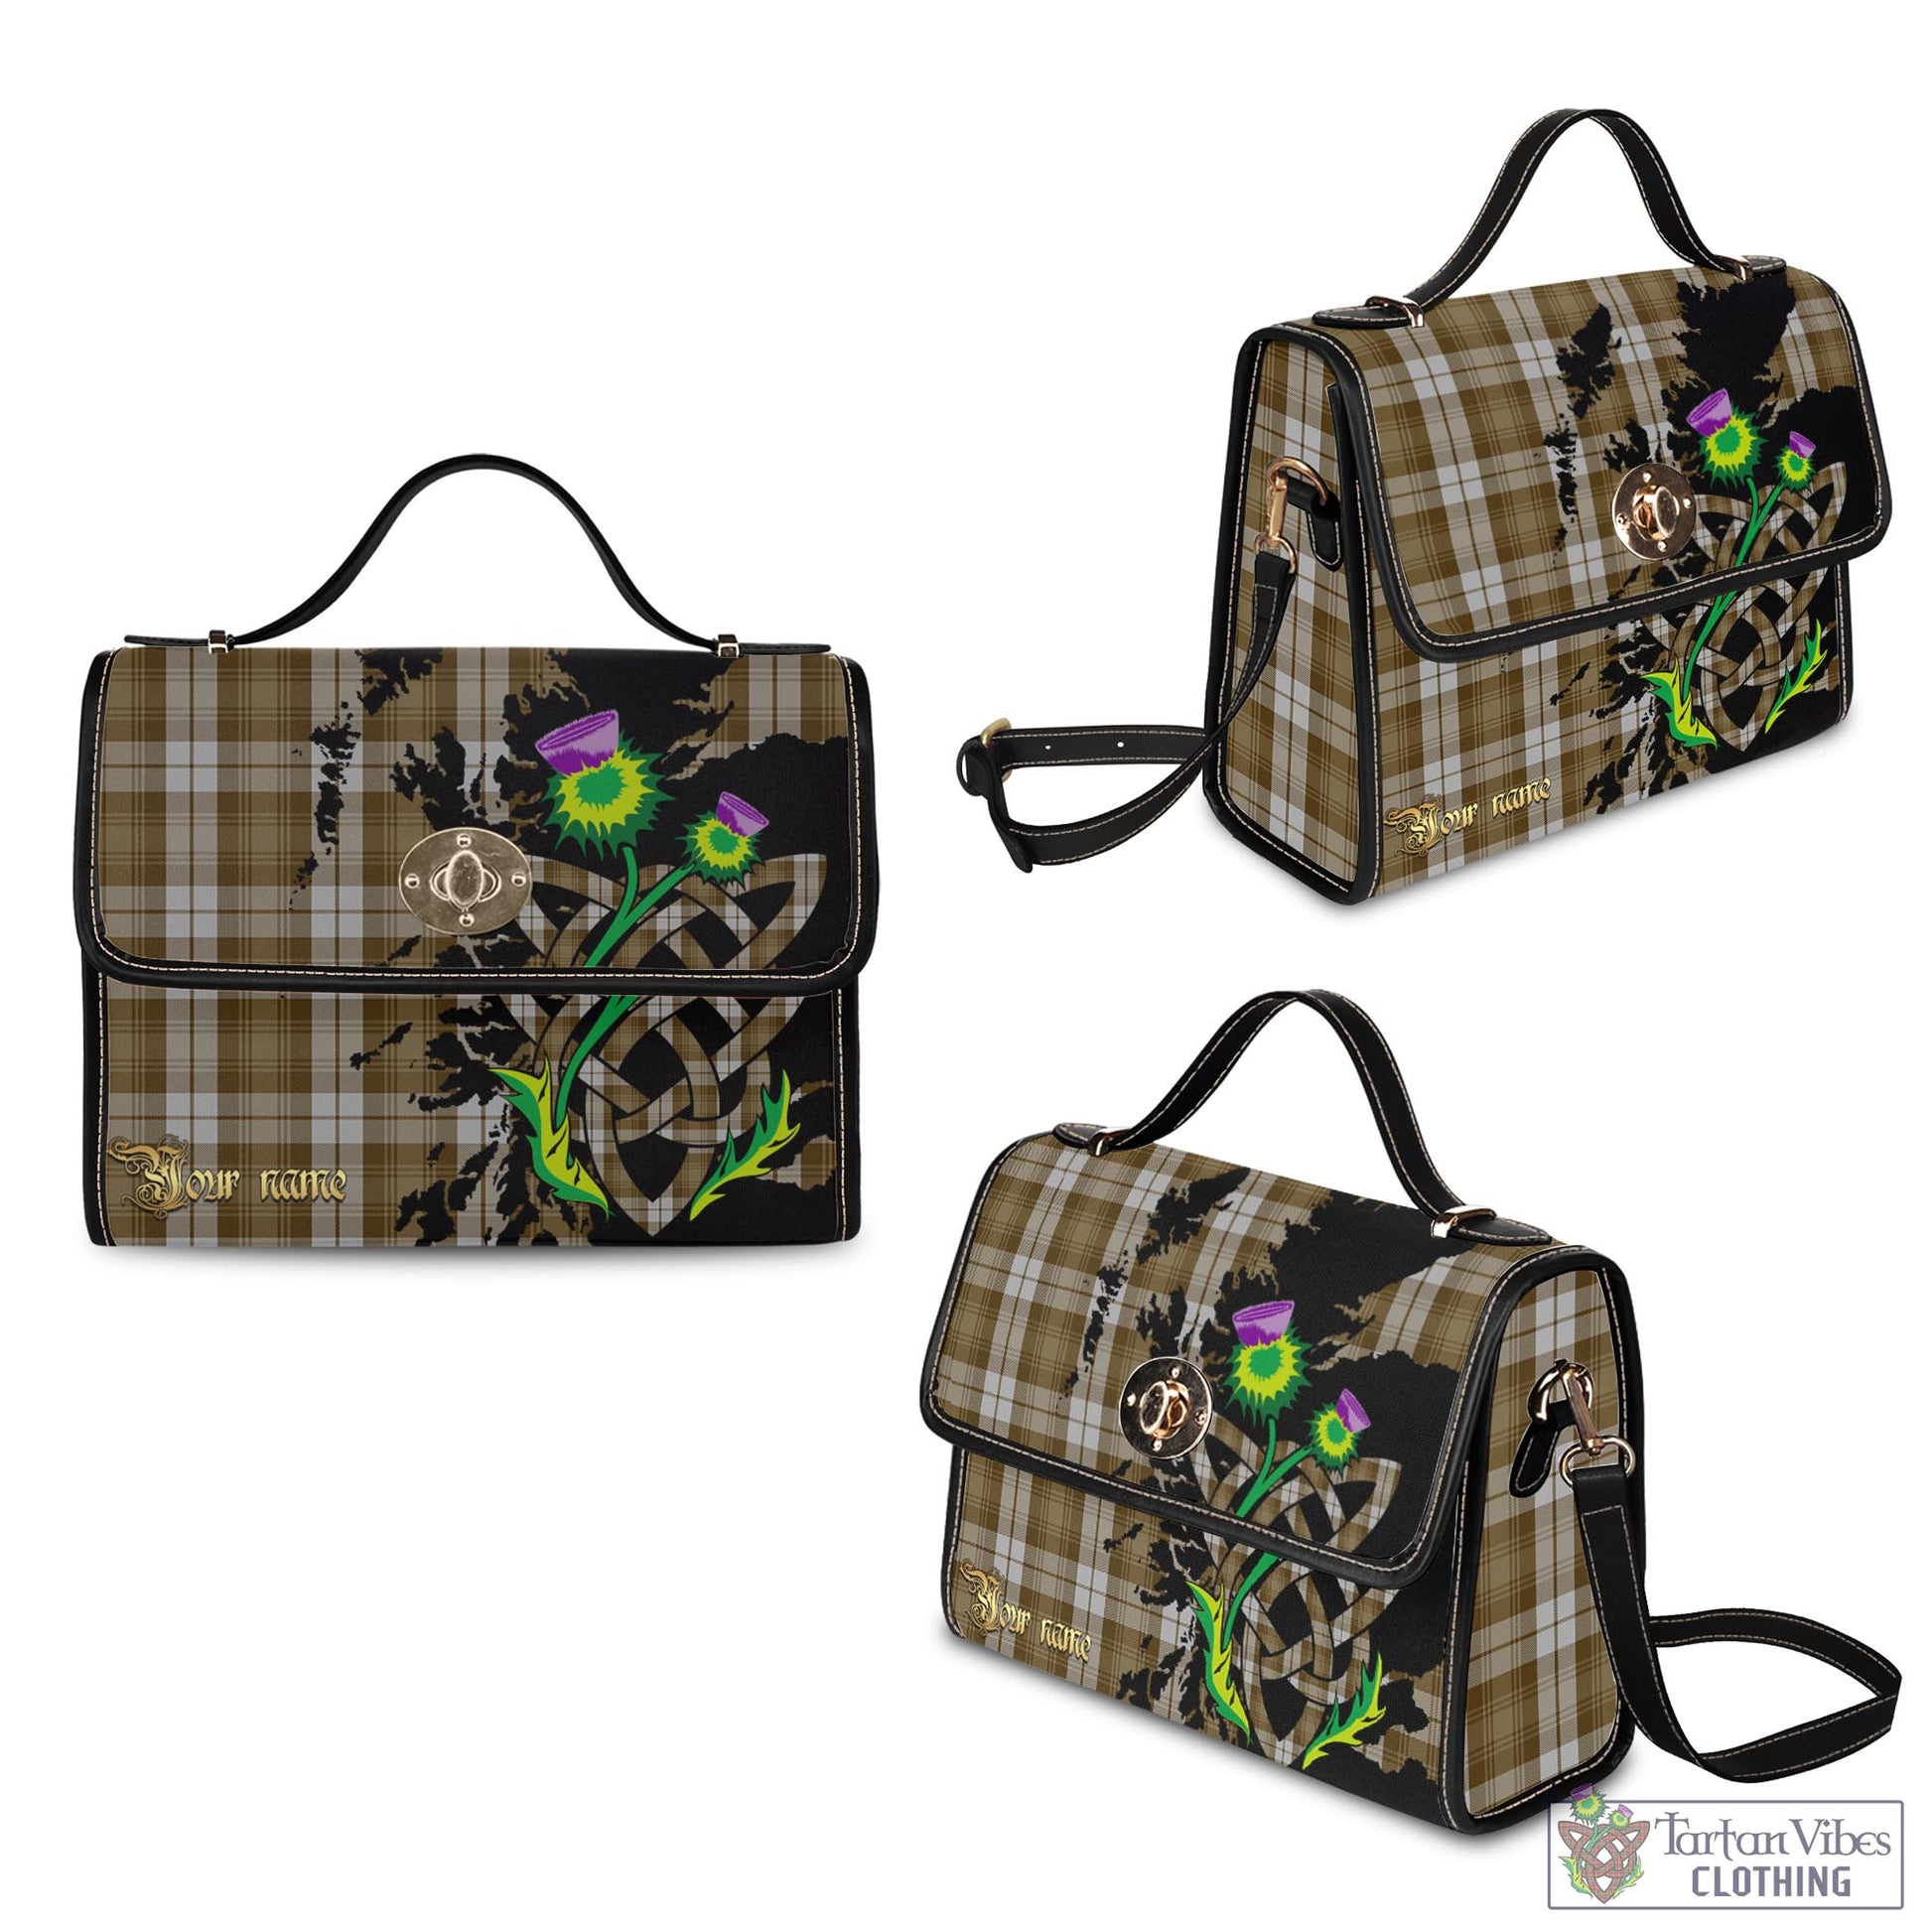 Tartan Vibes Clothing Baillie Dress Tartan Waterproof Canvas Bag with Scotland Map and Thistle Celtic Accents